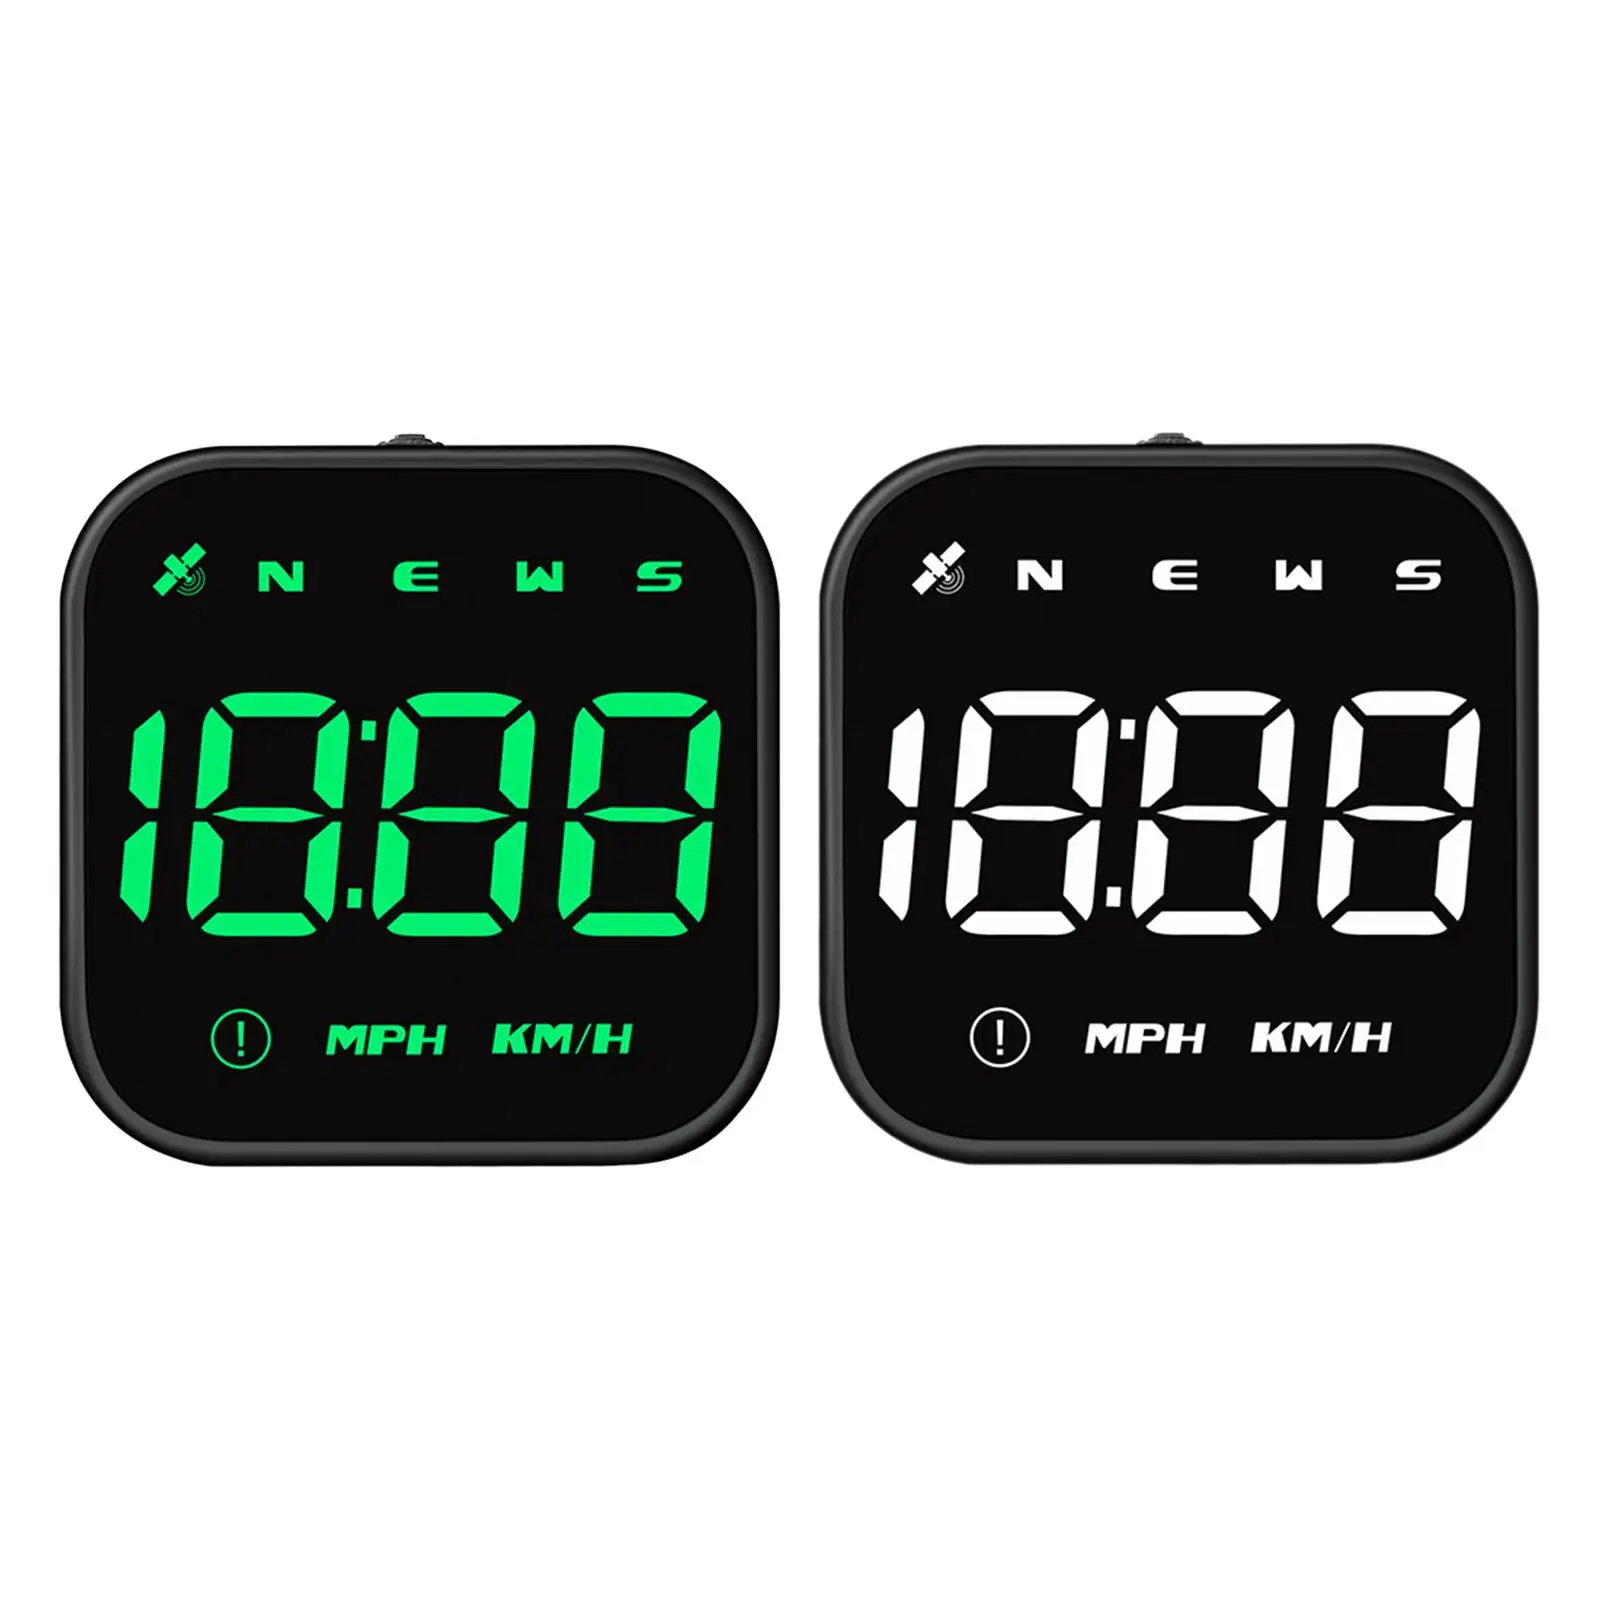 

Car HUD Head up Display GPS Portable Modern Car Accessory Universal Speedometer for Trucks Cars Suvs Various Vehicles Buses